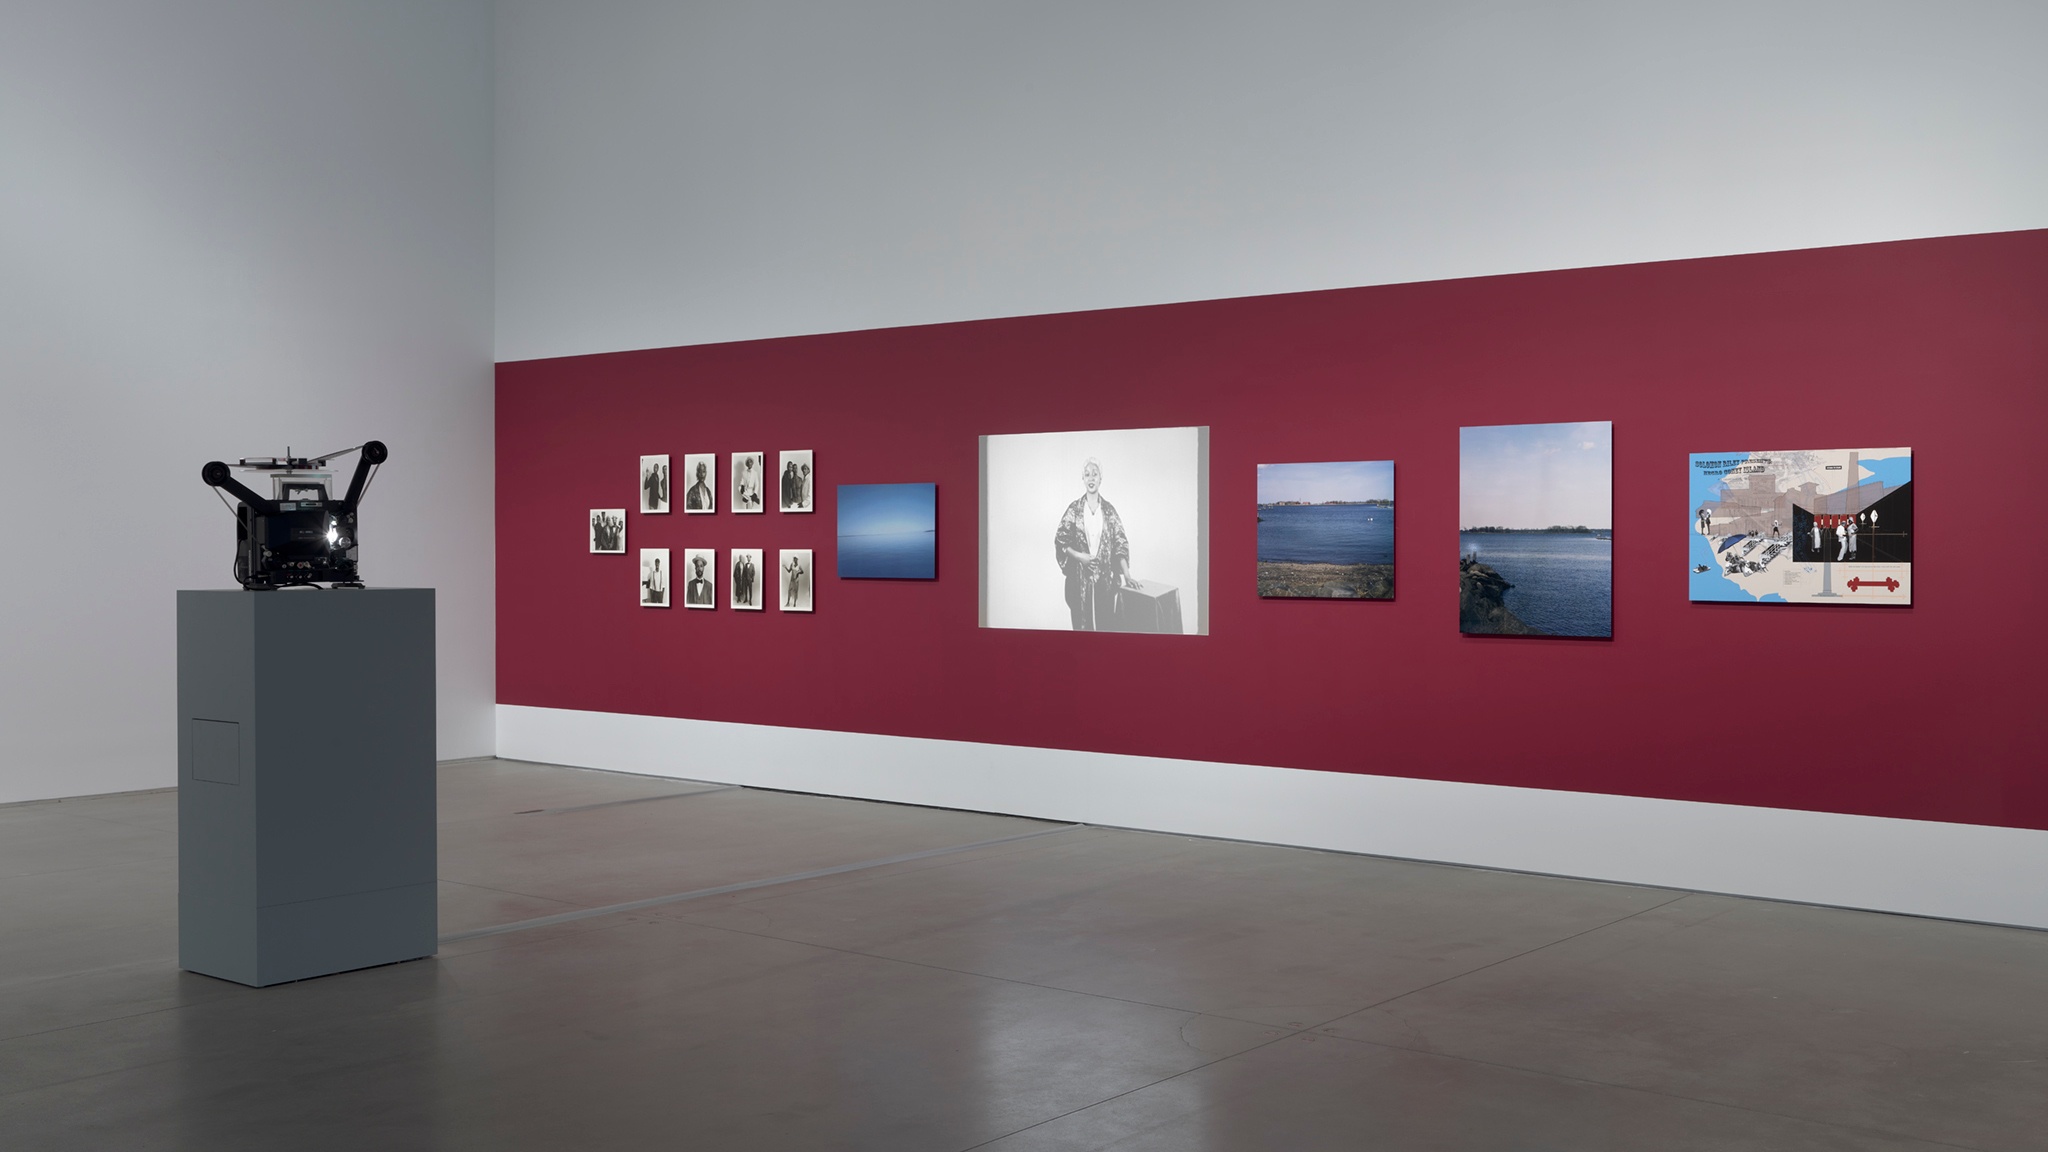 A film projector sits on a plinth at a distance from a red gallery wall with photos of different sizes hung on it